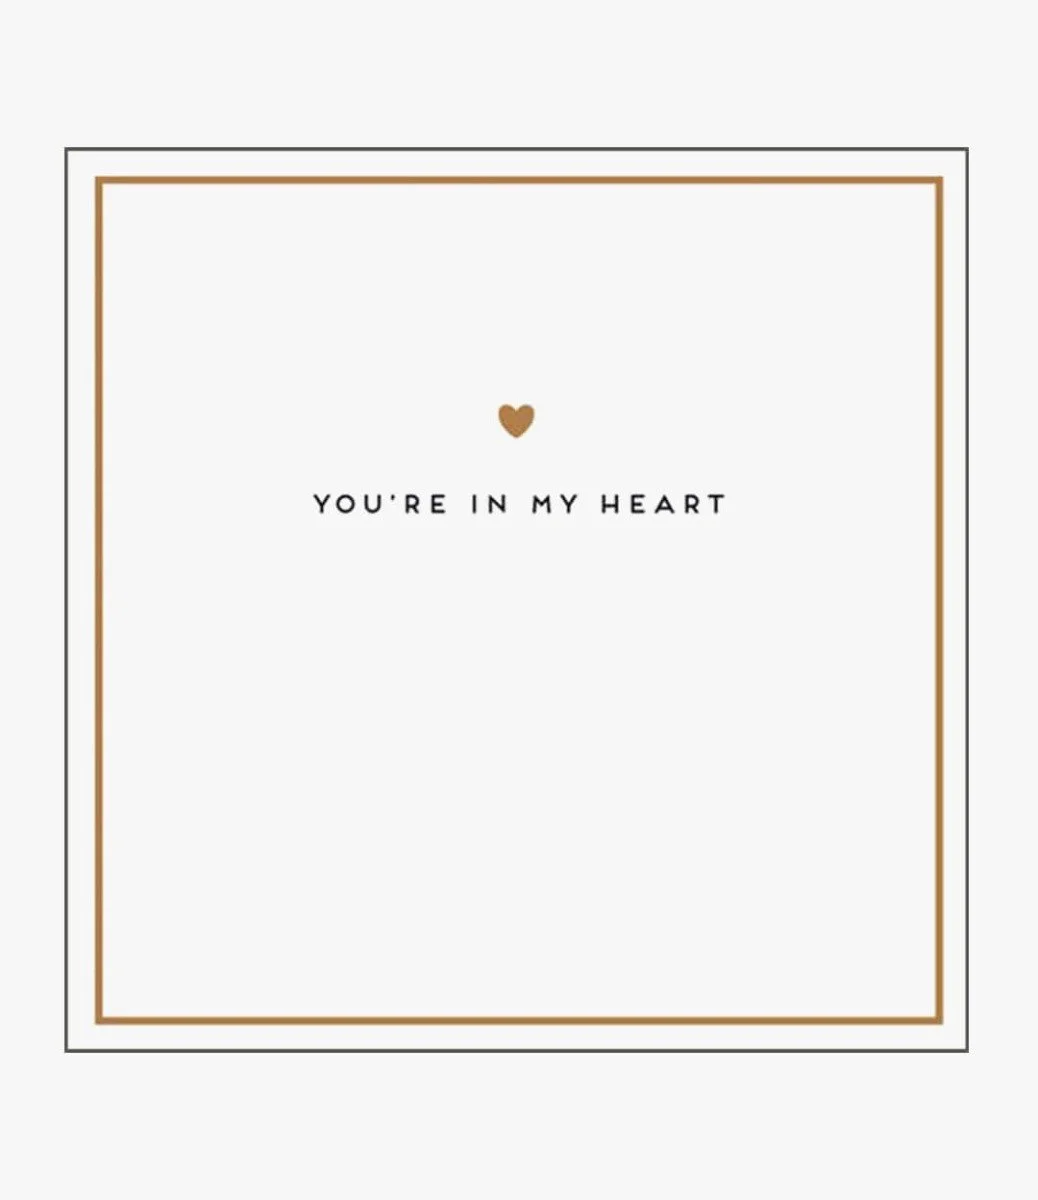 You're In My Heart Greeting Card by Alice Scott